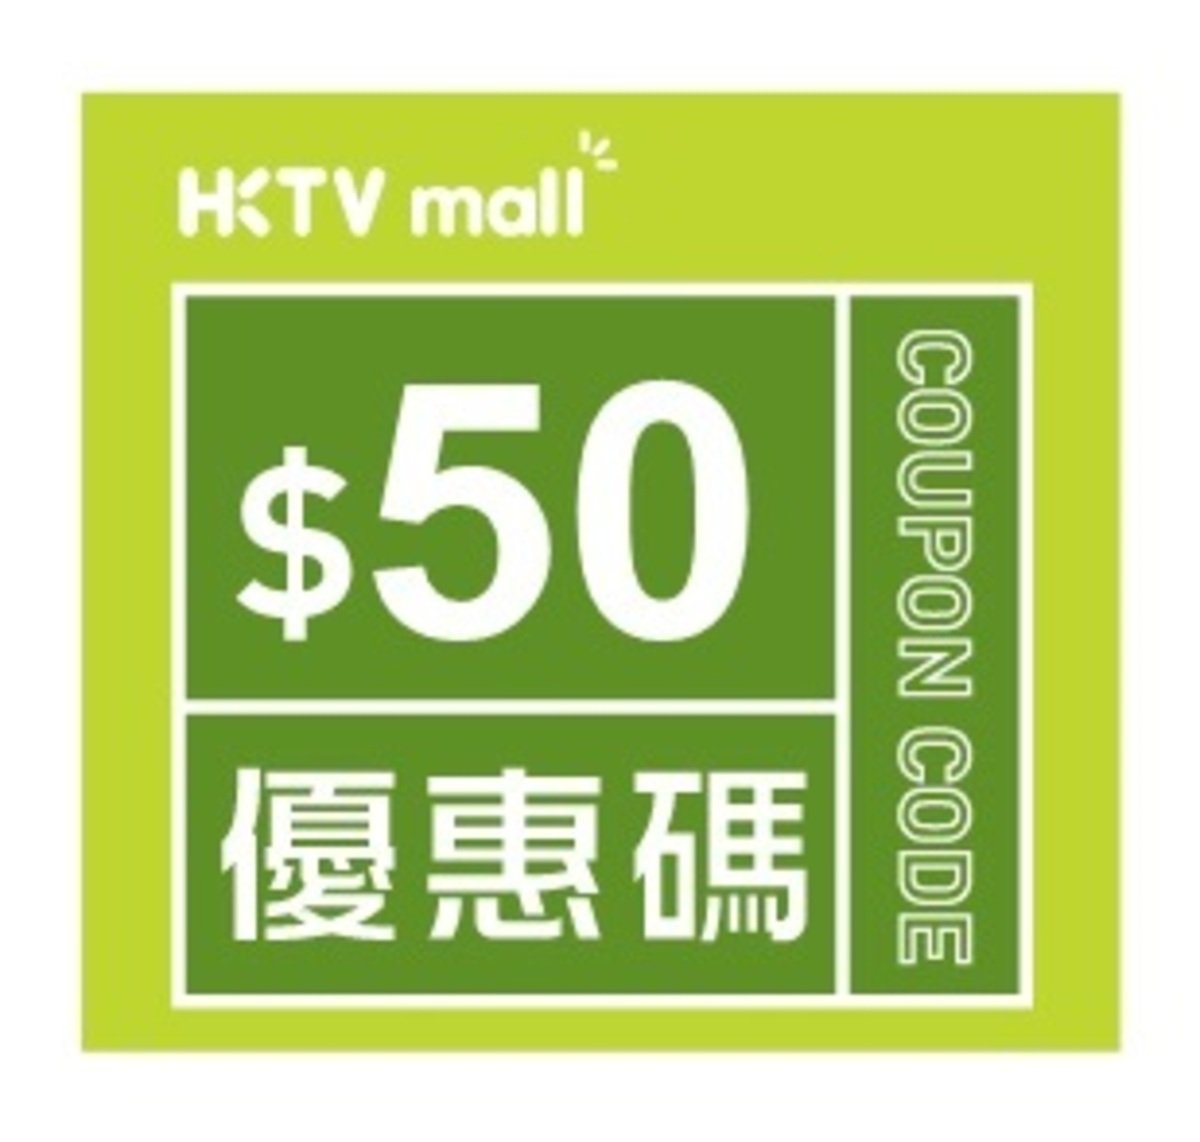 $50 Red Carrot Coupon Code[Expiry date: 2018.02.28]